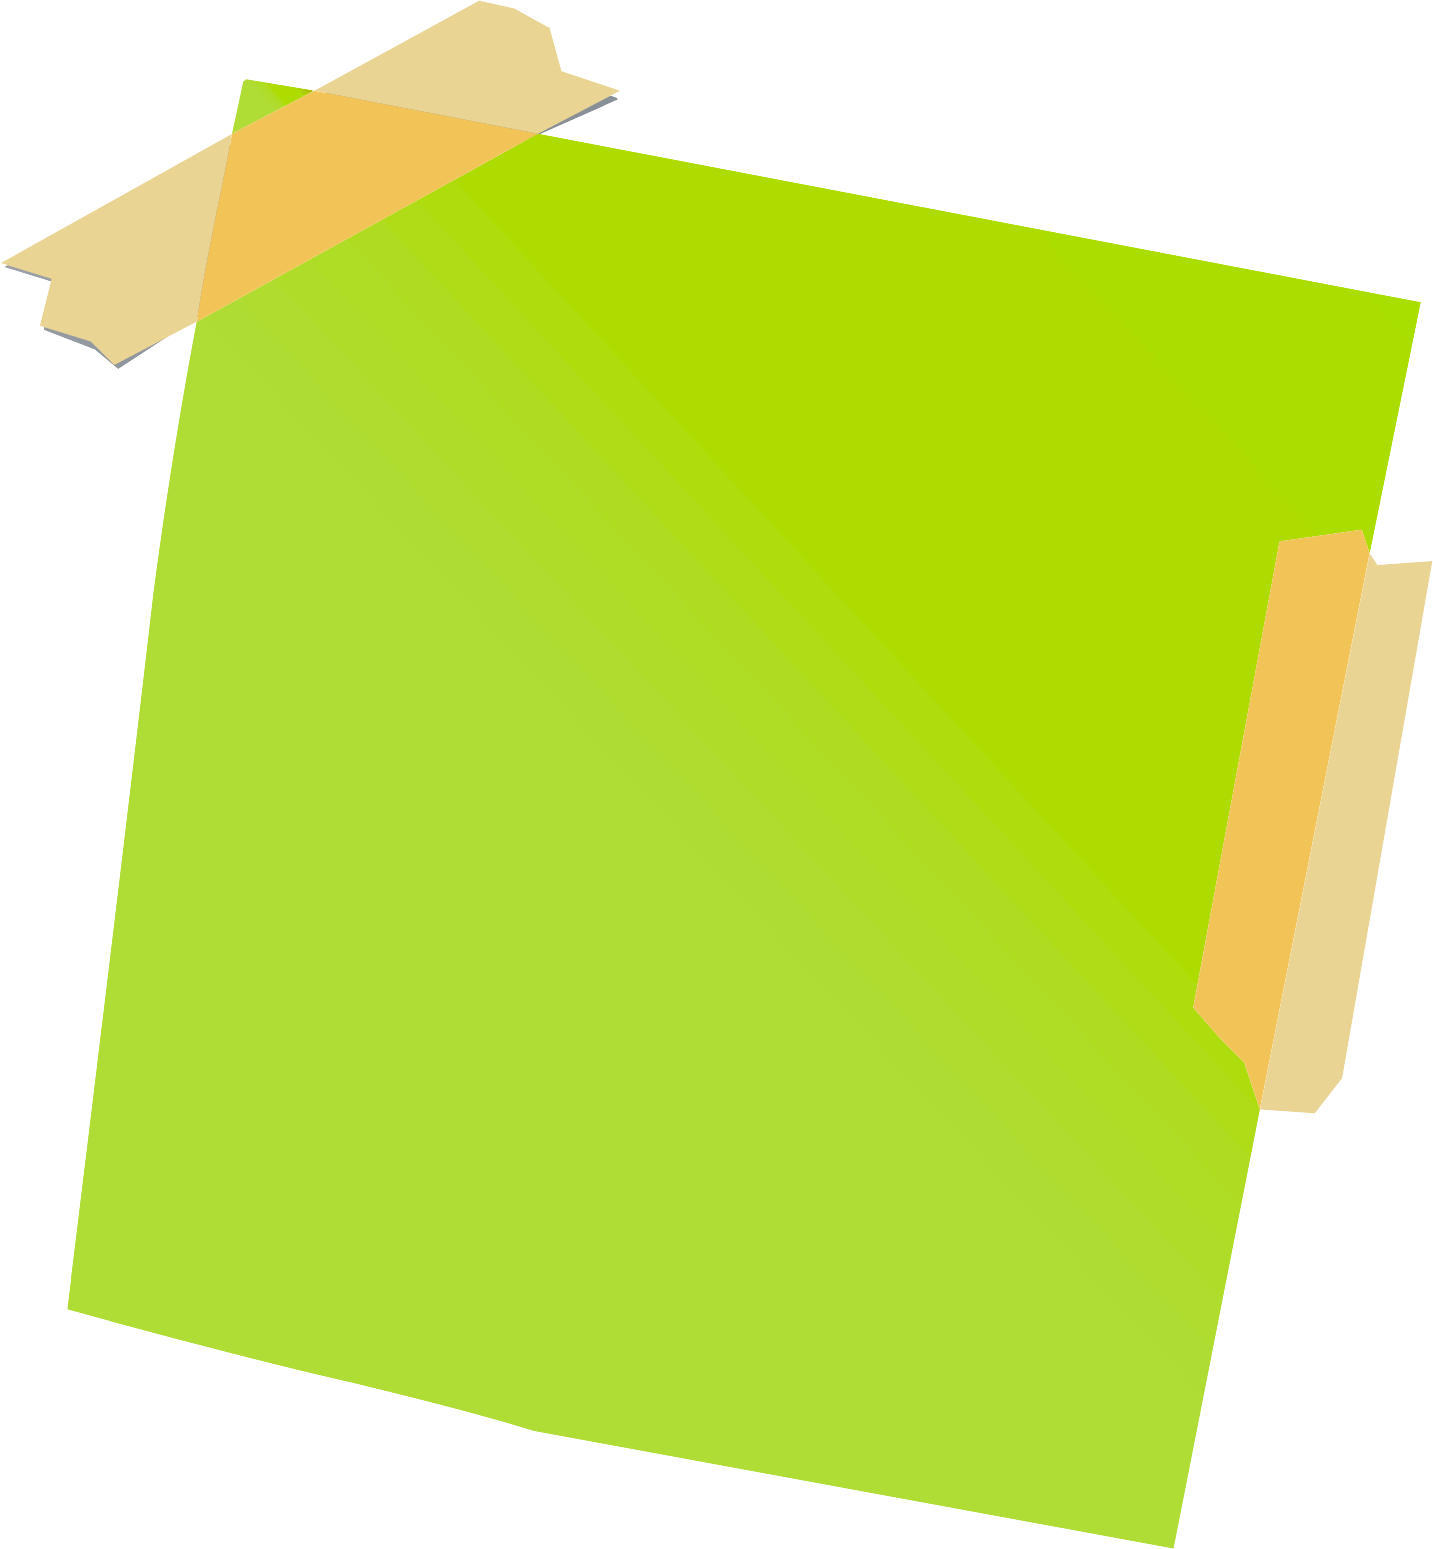 Green clipart sticky.